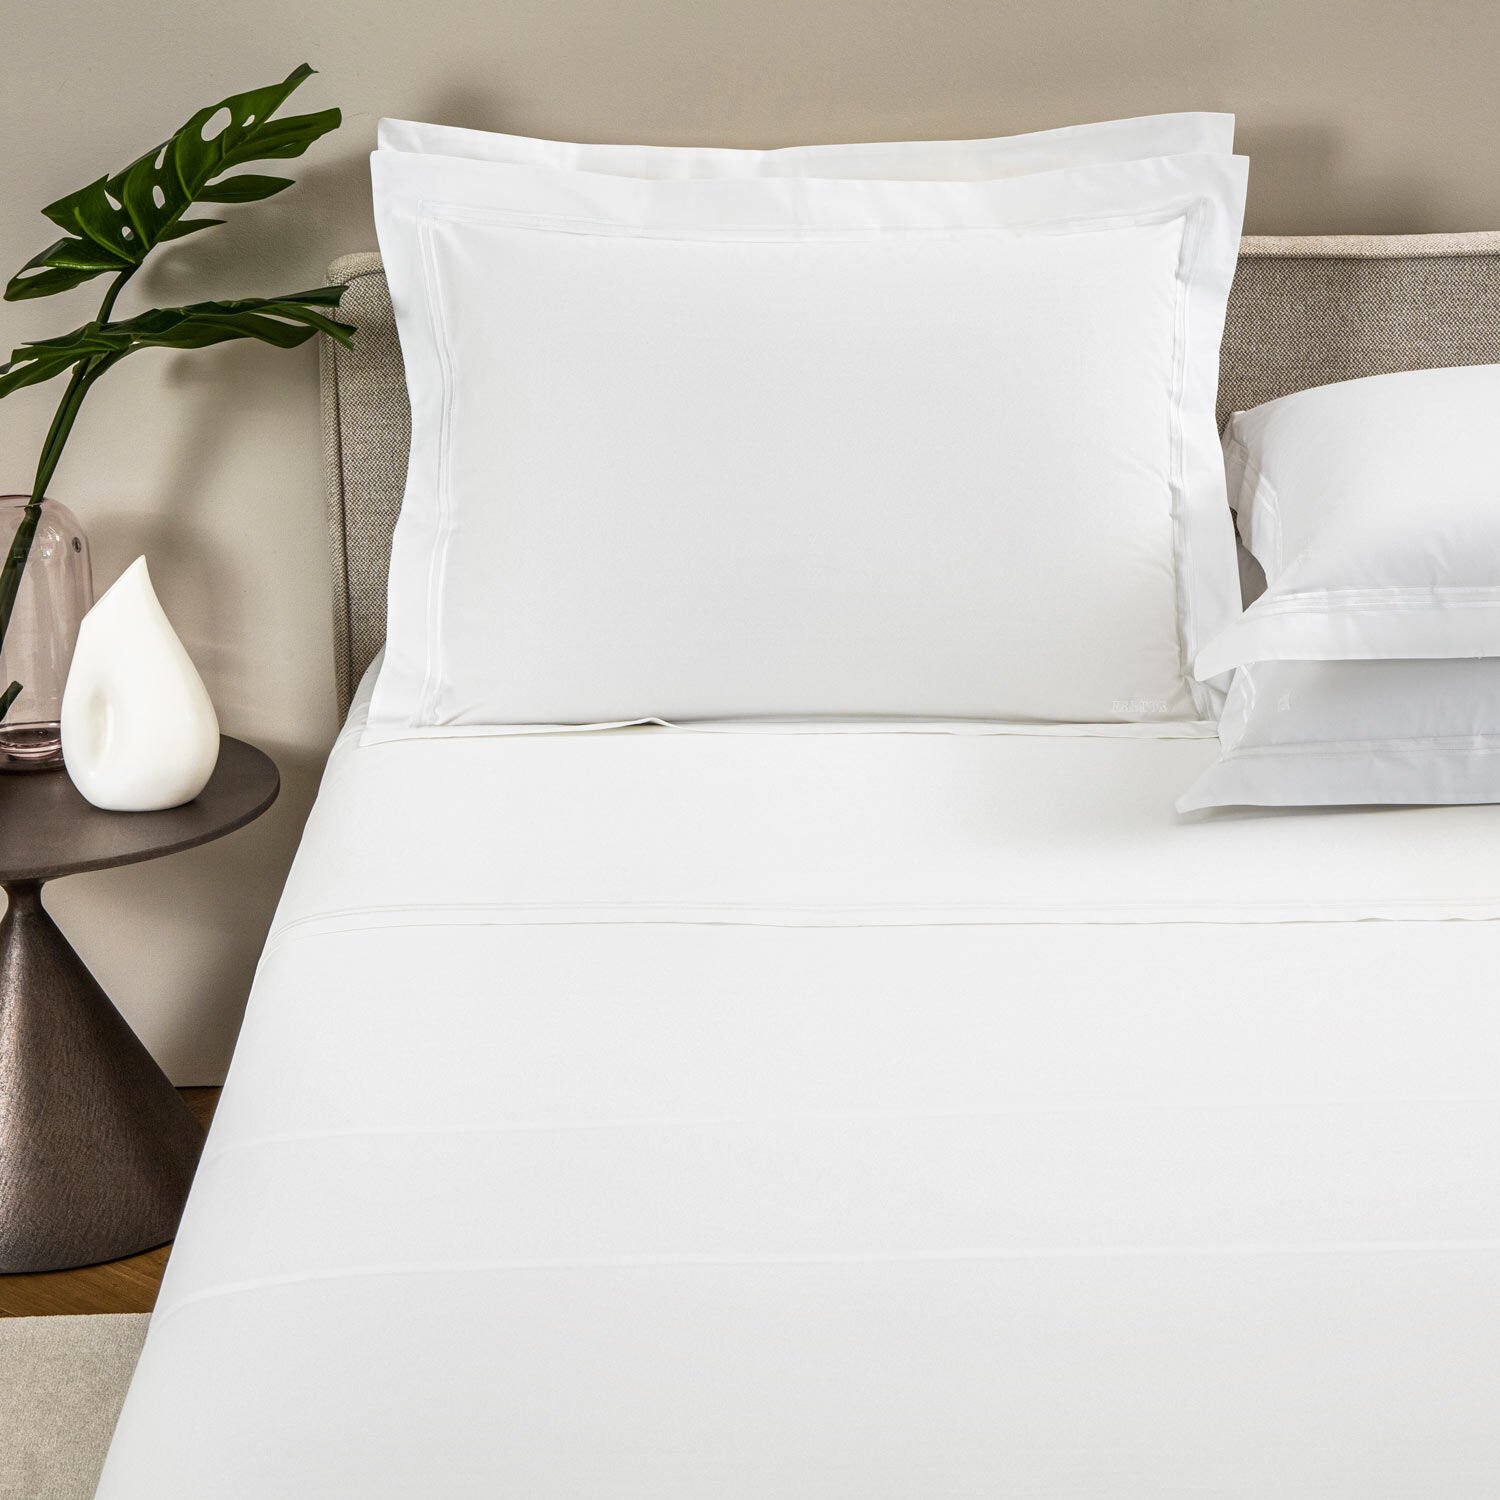 FRETTE HOTEL COTONE KING FITTED SHEET PERCALE LONG STAPLE COTTON WHITE ITALY 